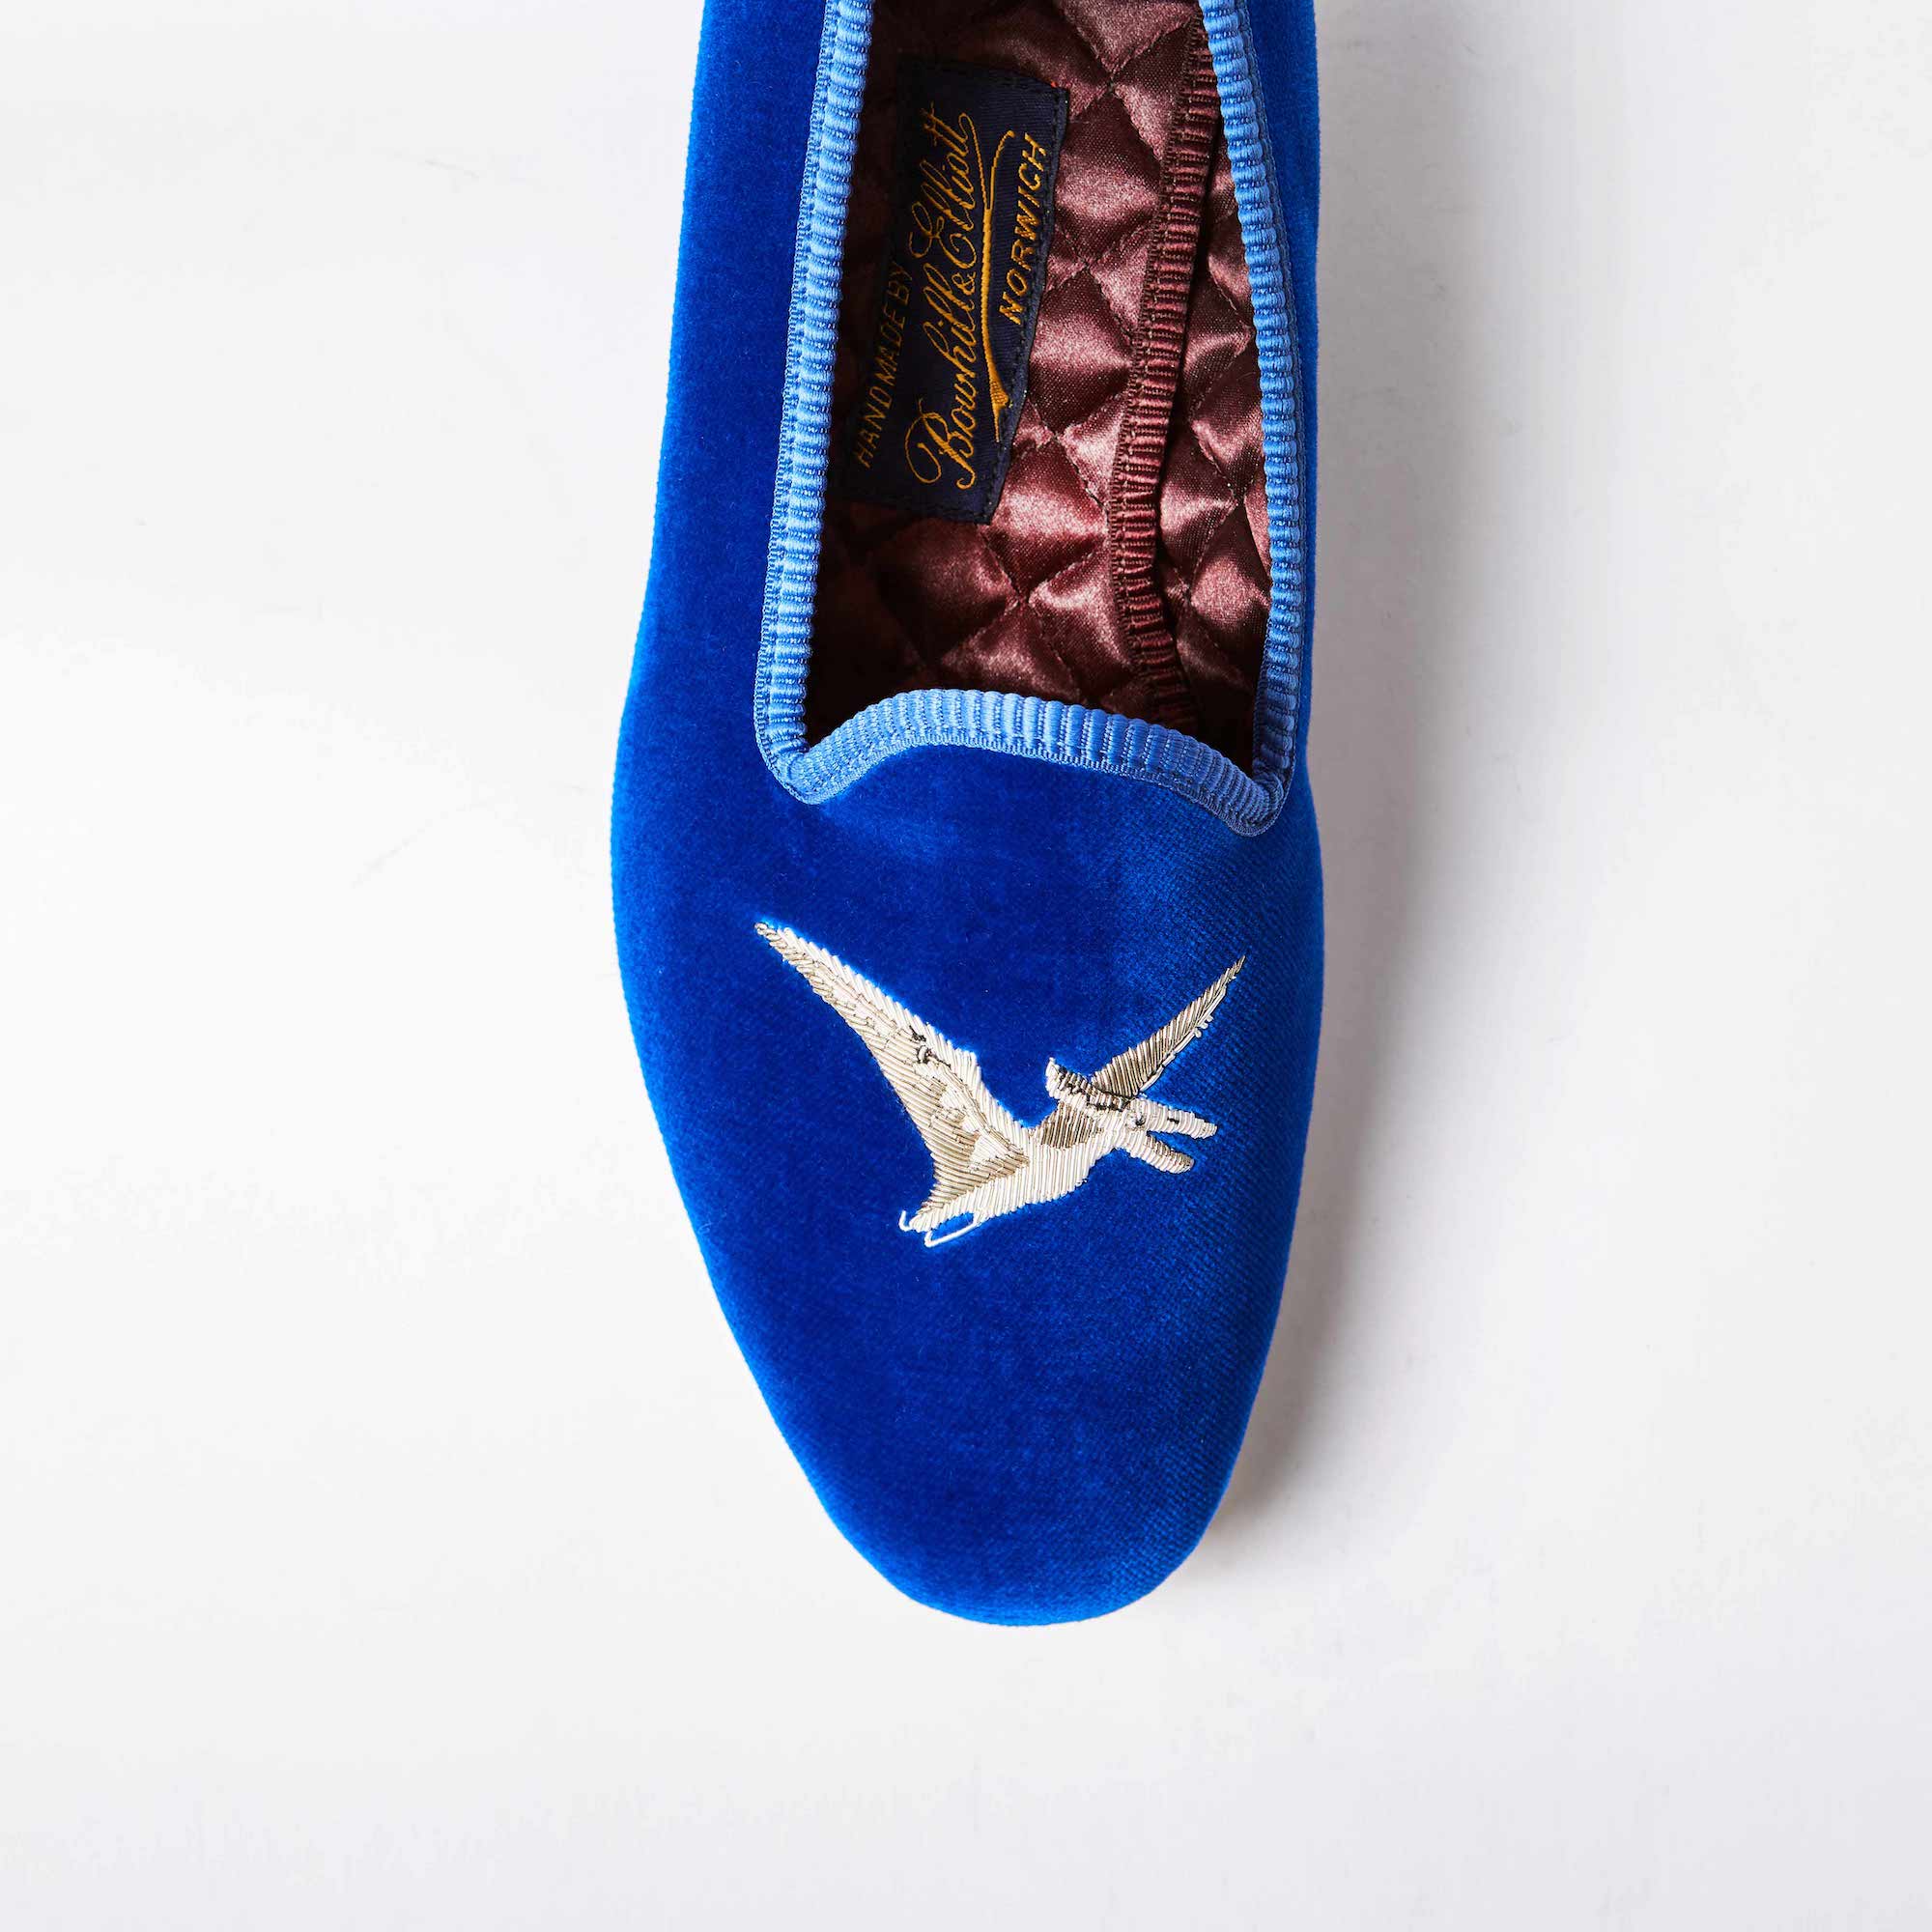 Royal Blue Velvet Venetian with Embroidered Pterodactyl